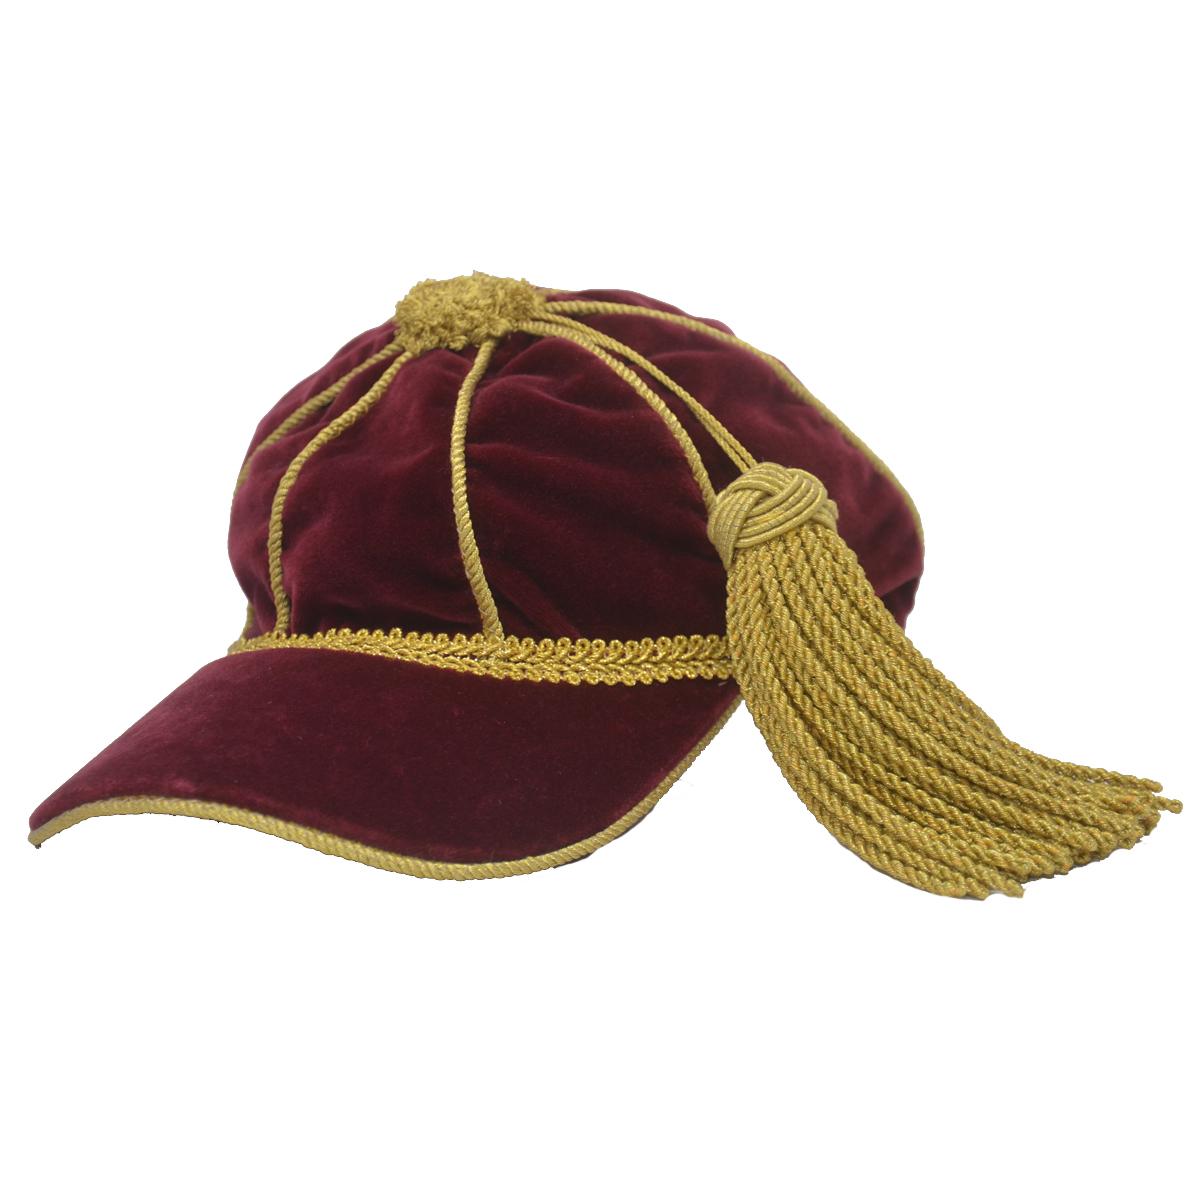 Company-Gucci
Model-Gucci Red Velvet Tassel Hat 
Color-Red 
Date Code-N/A
Material-Velvet
Measurements-Size S/ 56
Strap-N/A
Outside-No stains, rips or tears on the canvas.
Inside-No rips tears or stains 
Odor-None
Made in Italy
Includes-Hat ONLY